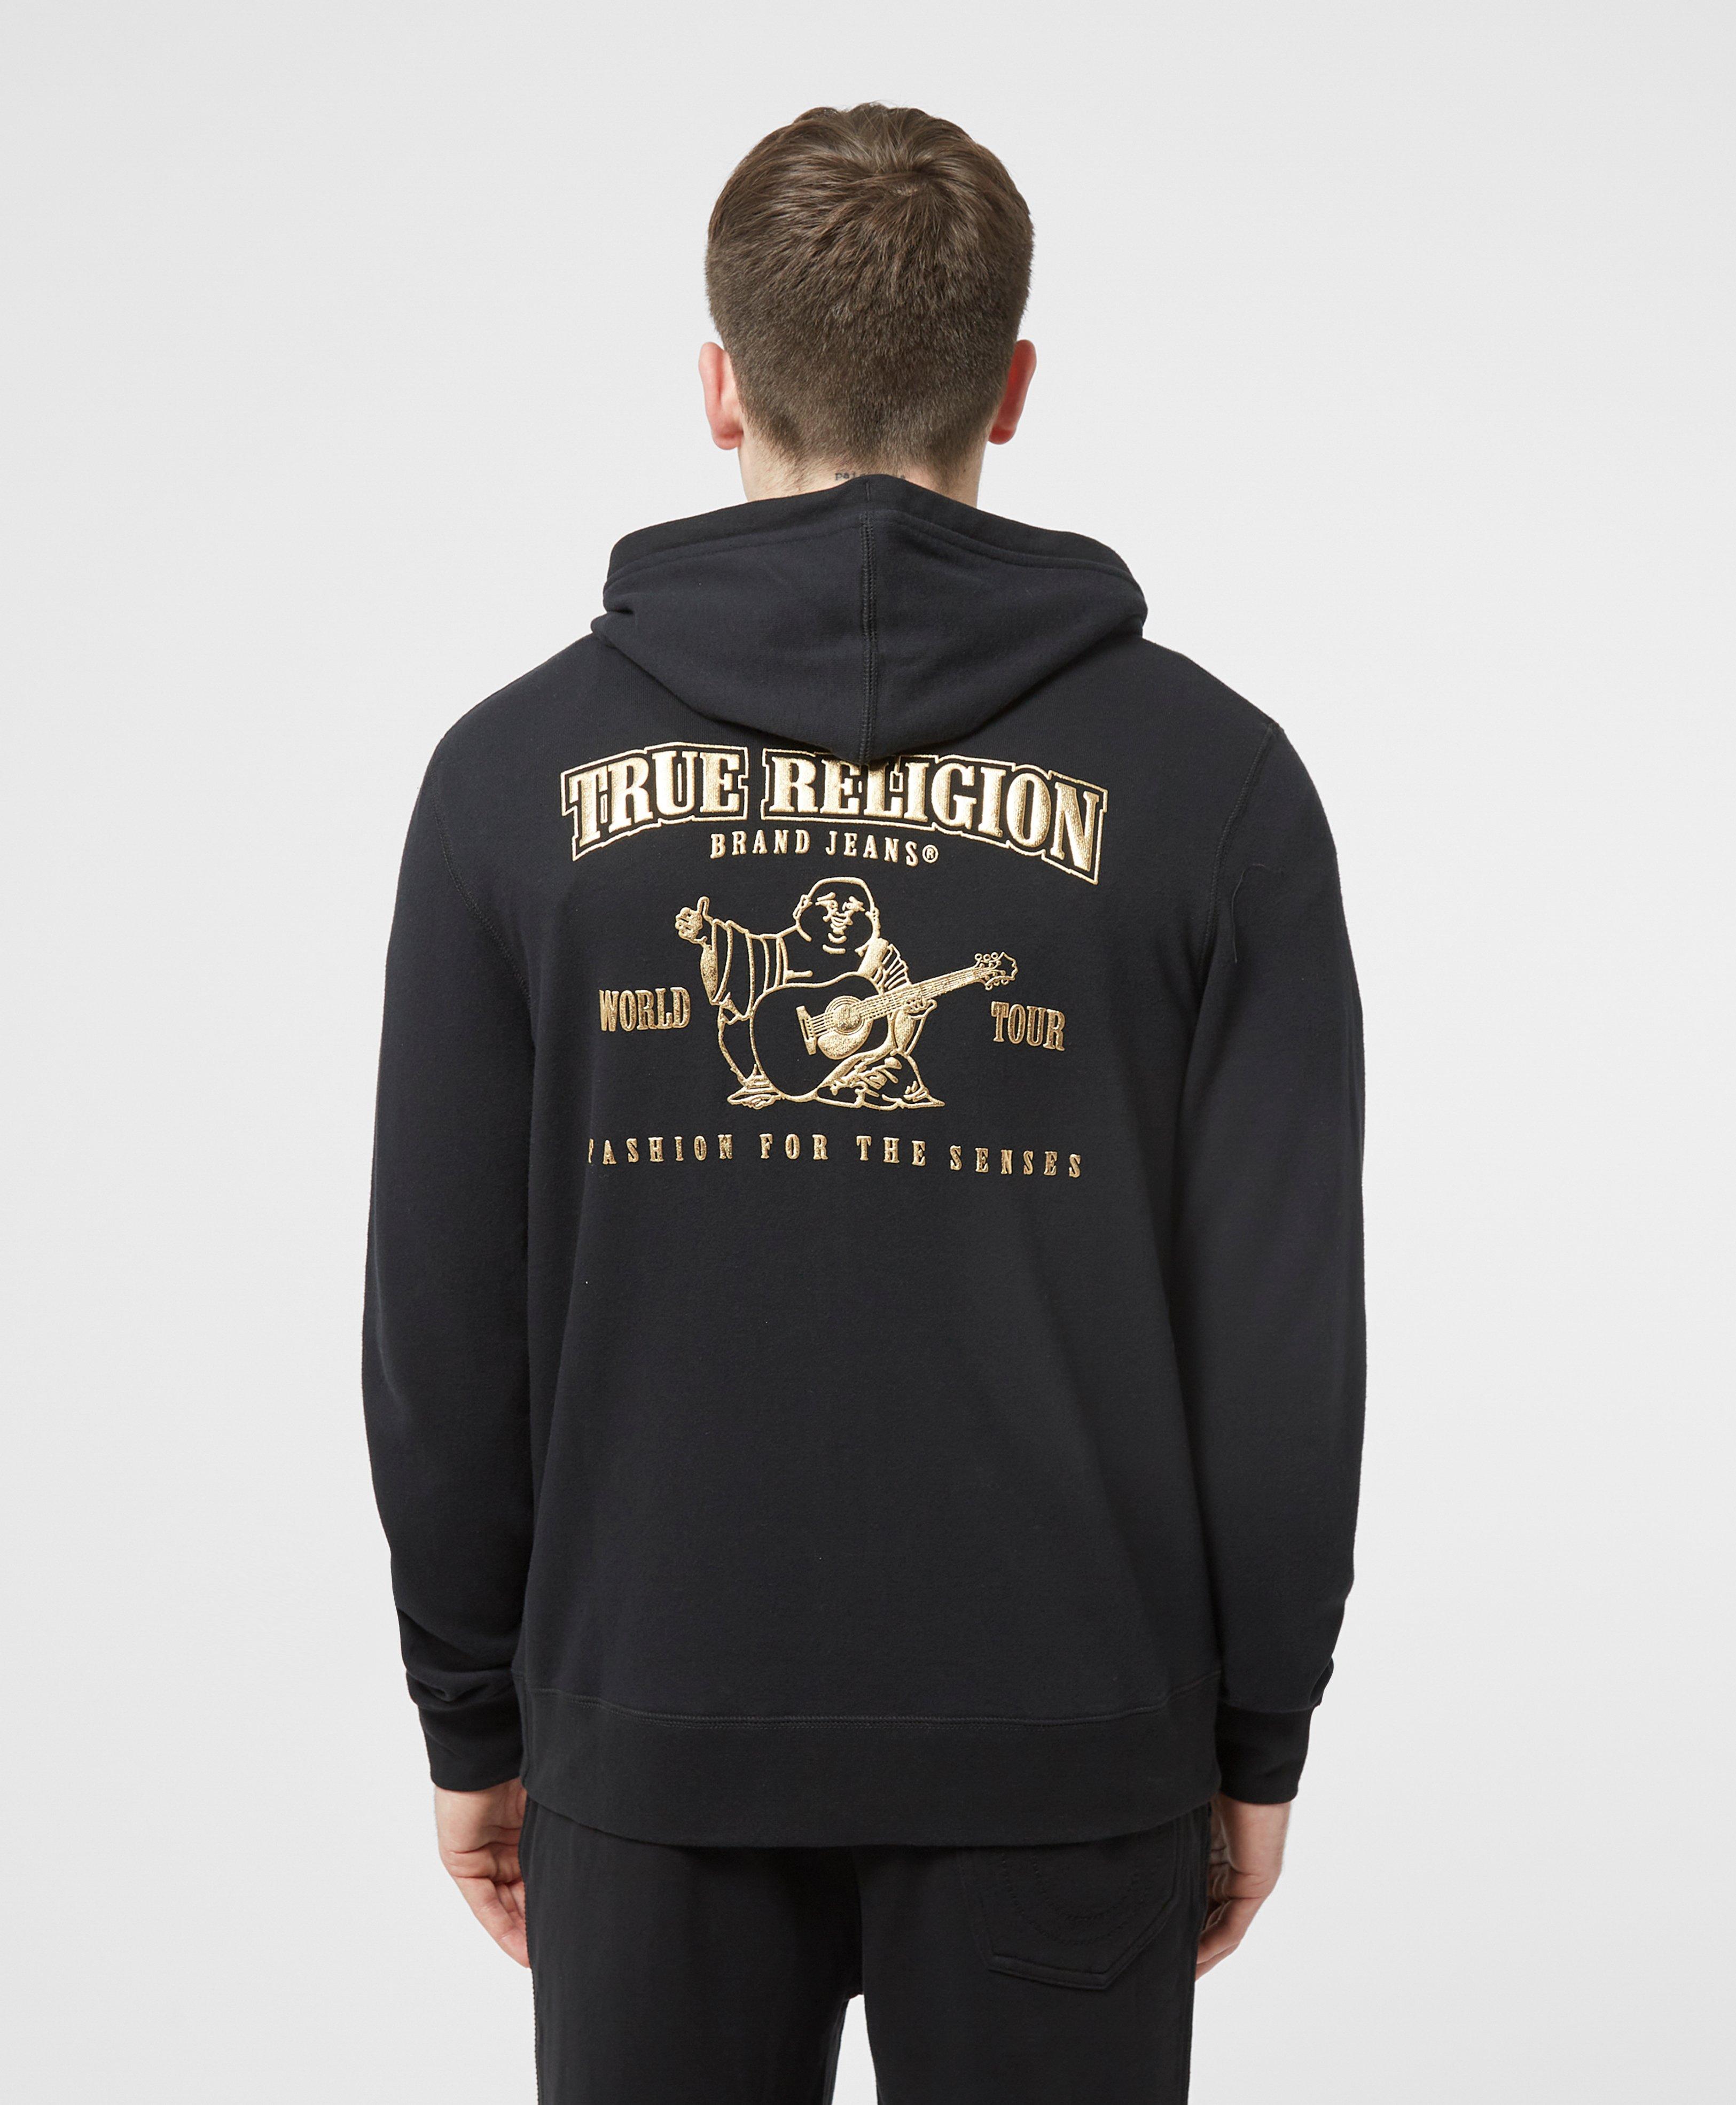 true religion hoodie black and gold